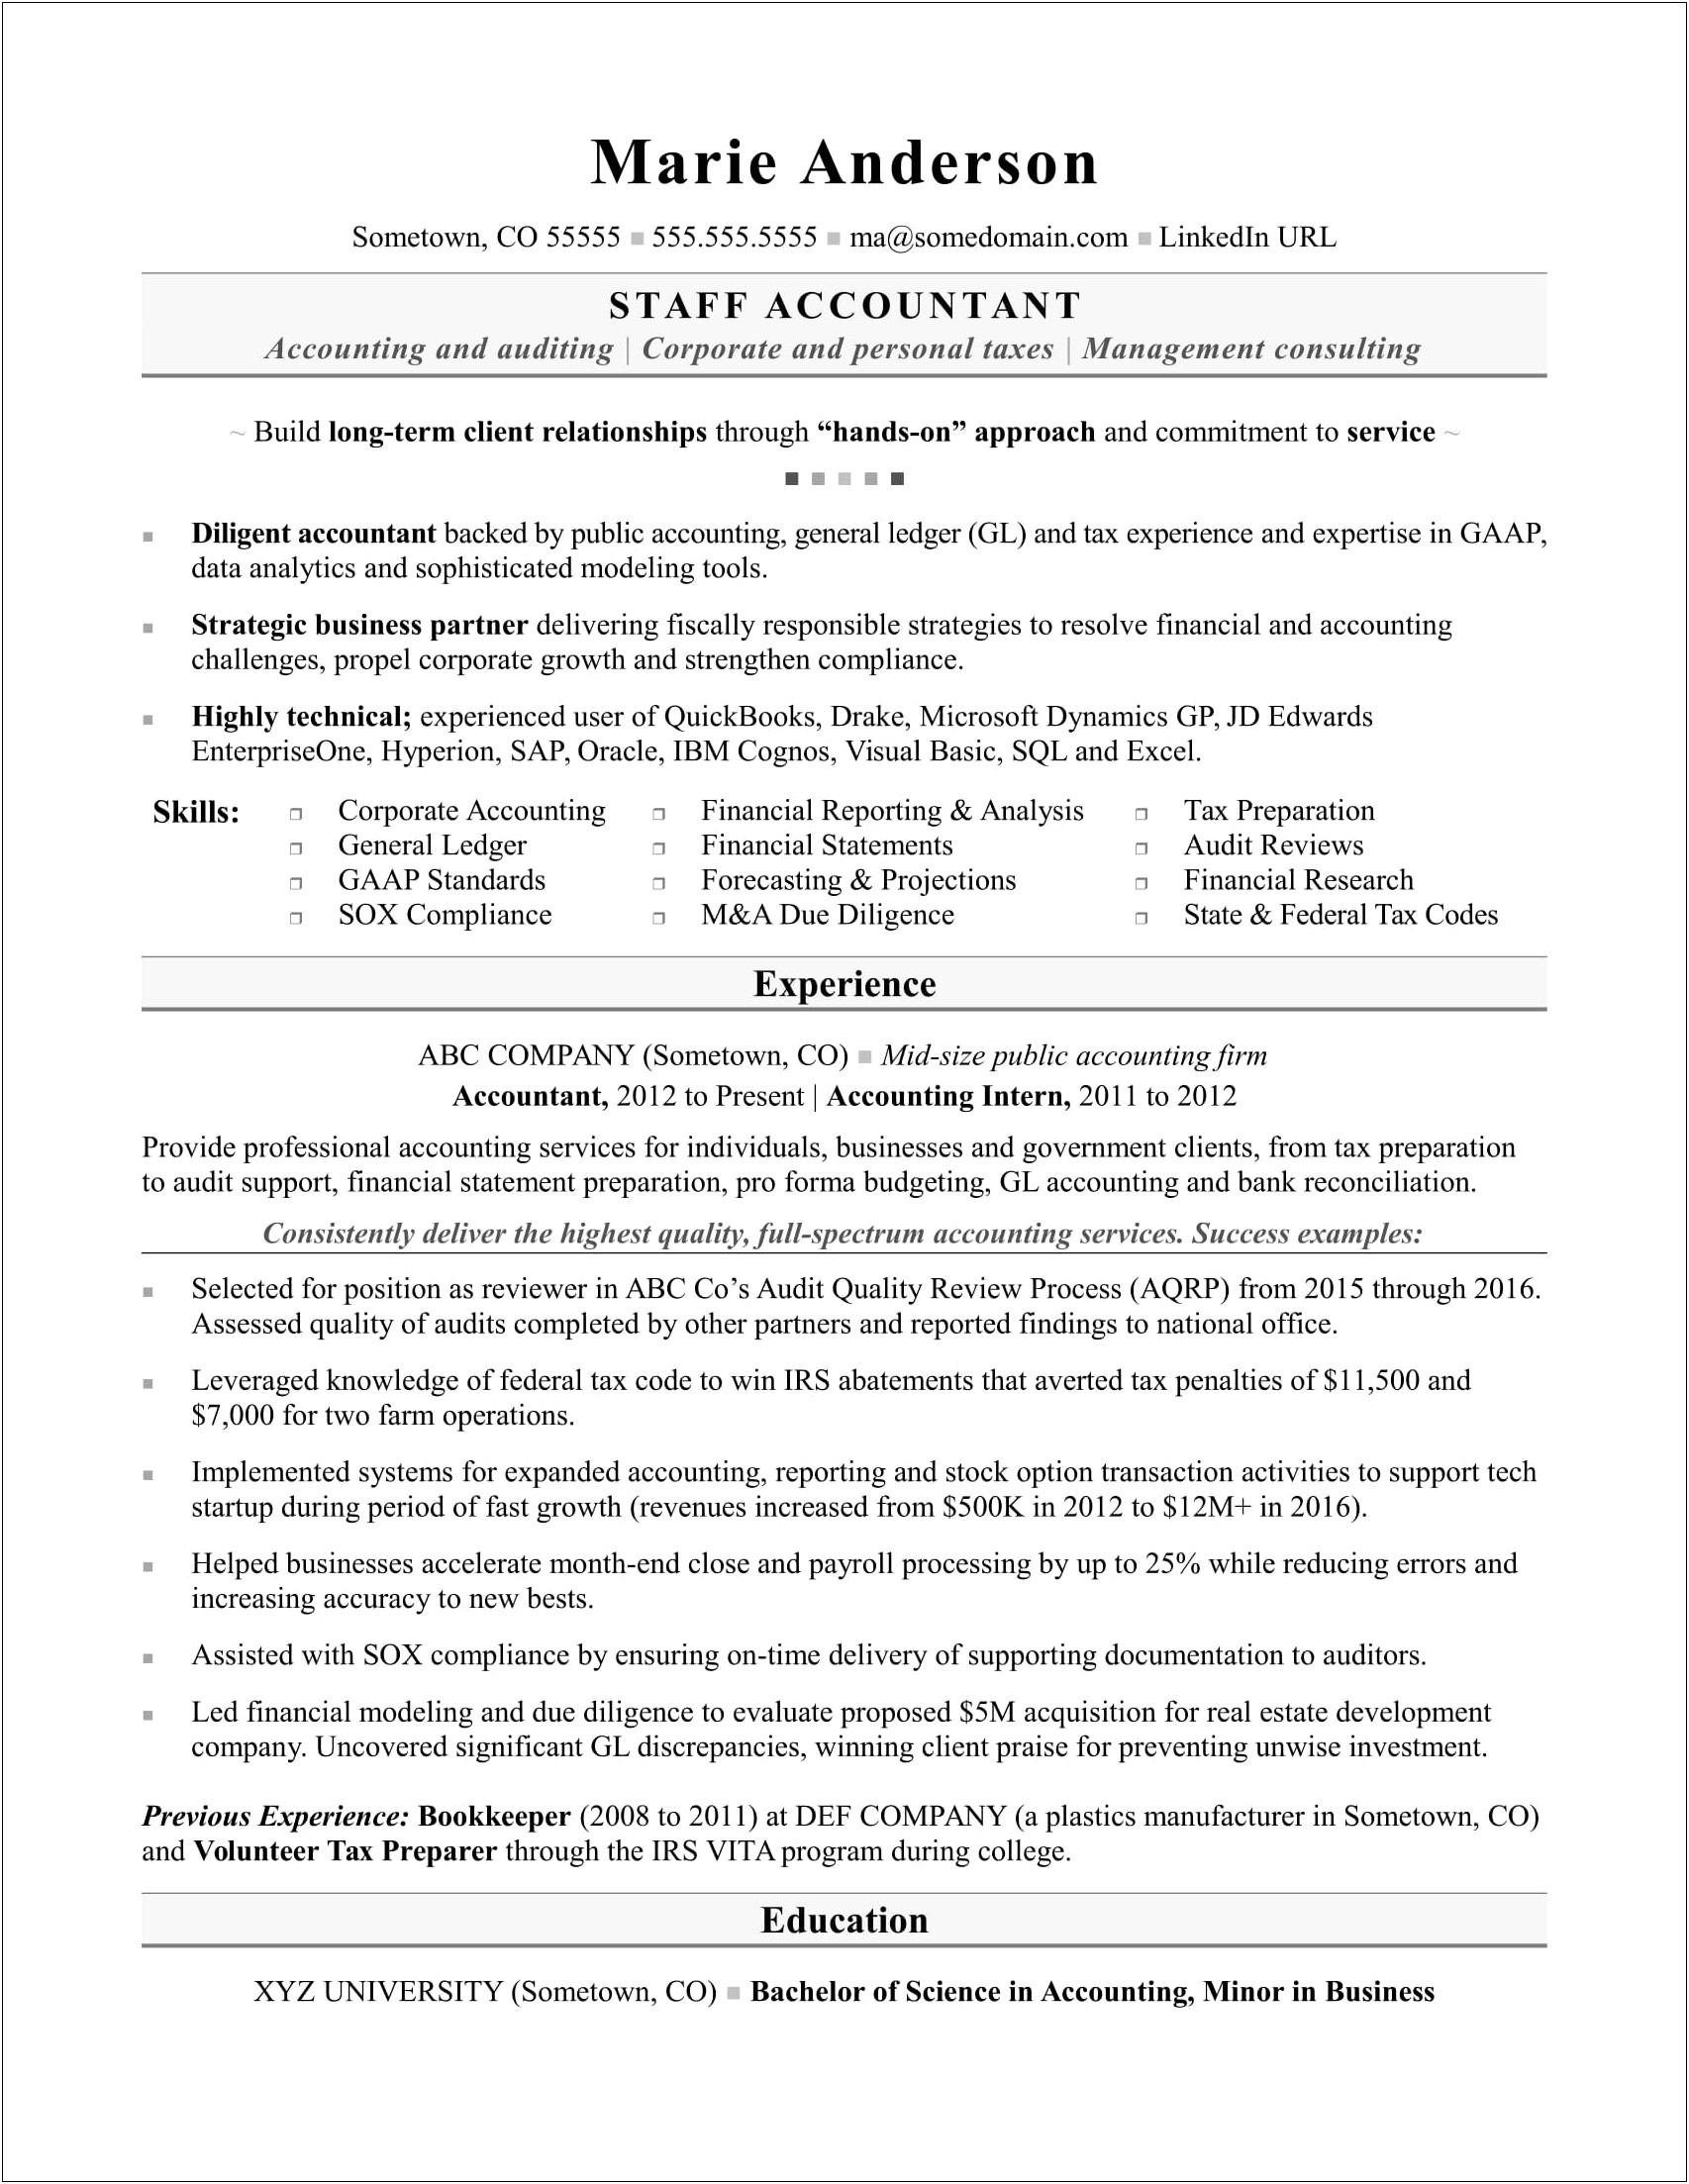 Resume Samples For Tax Professionals